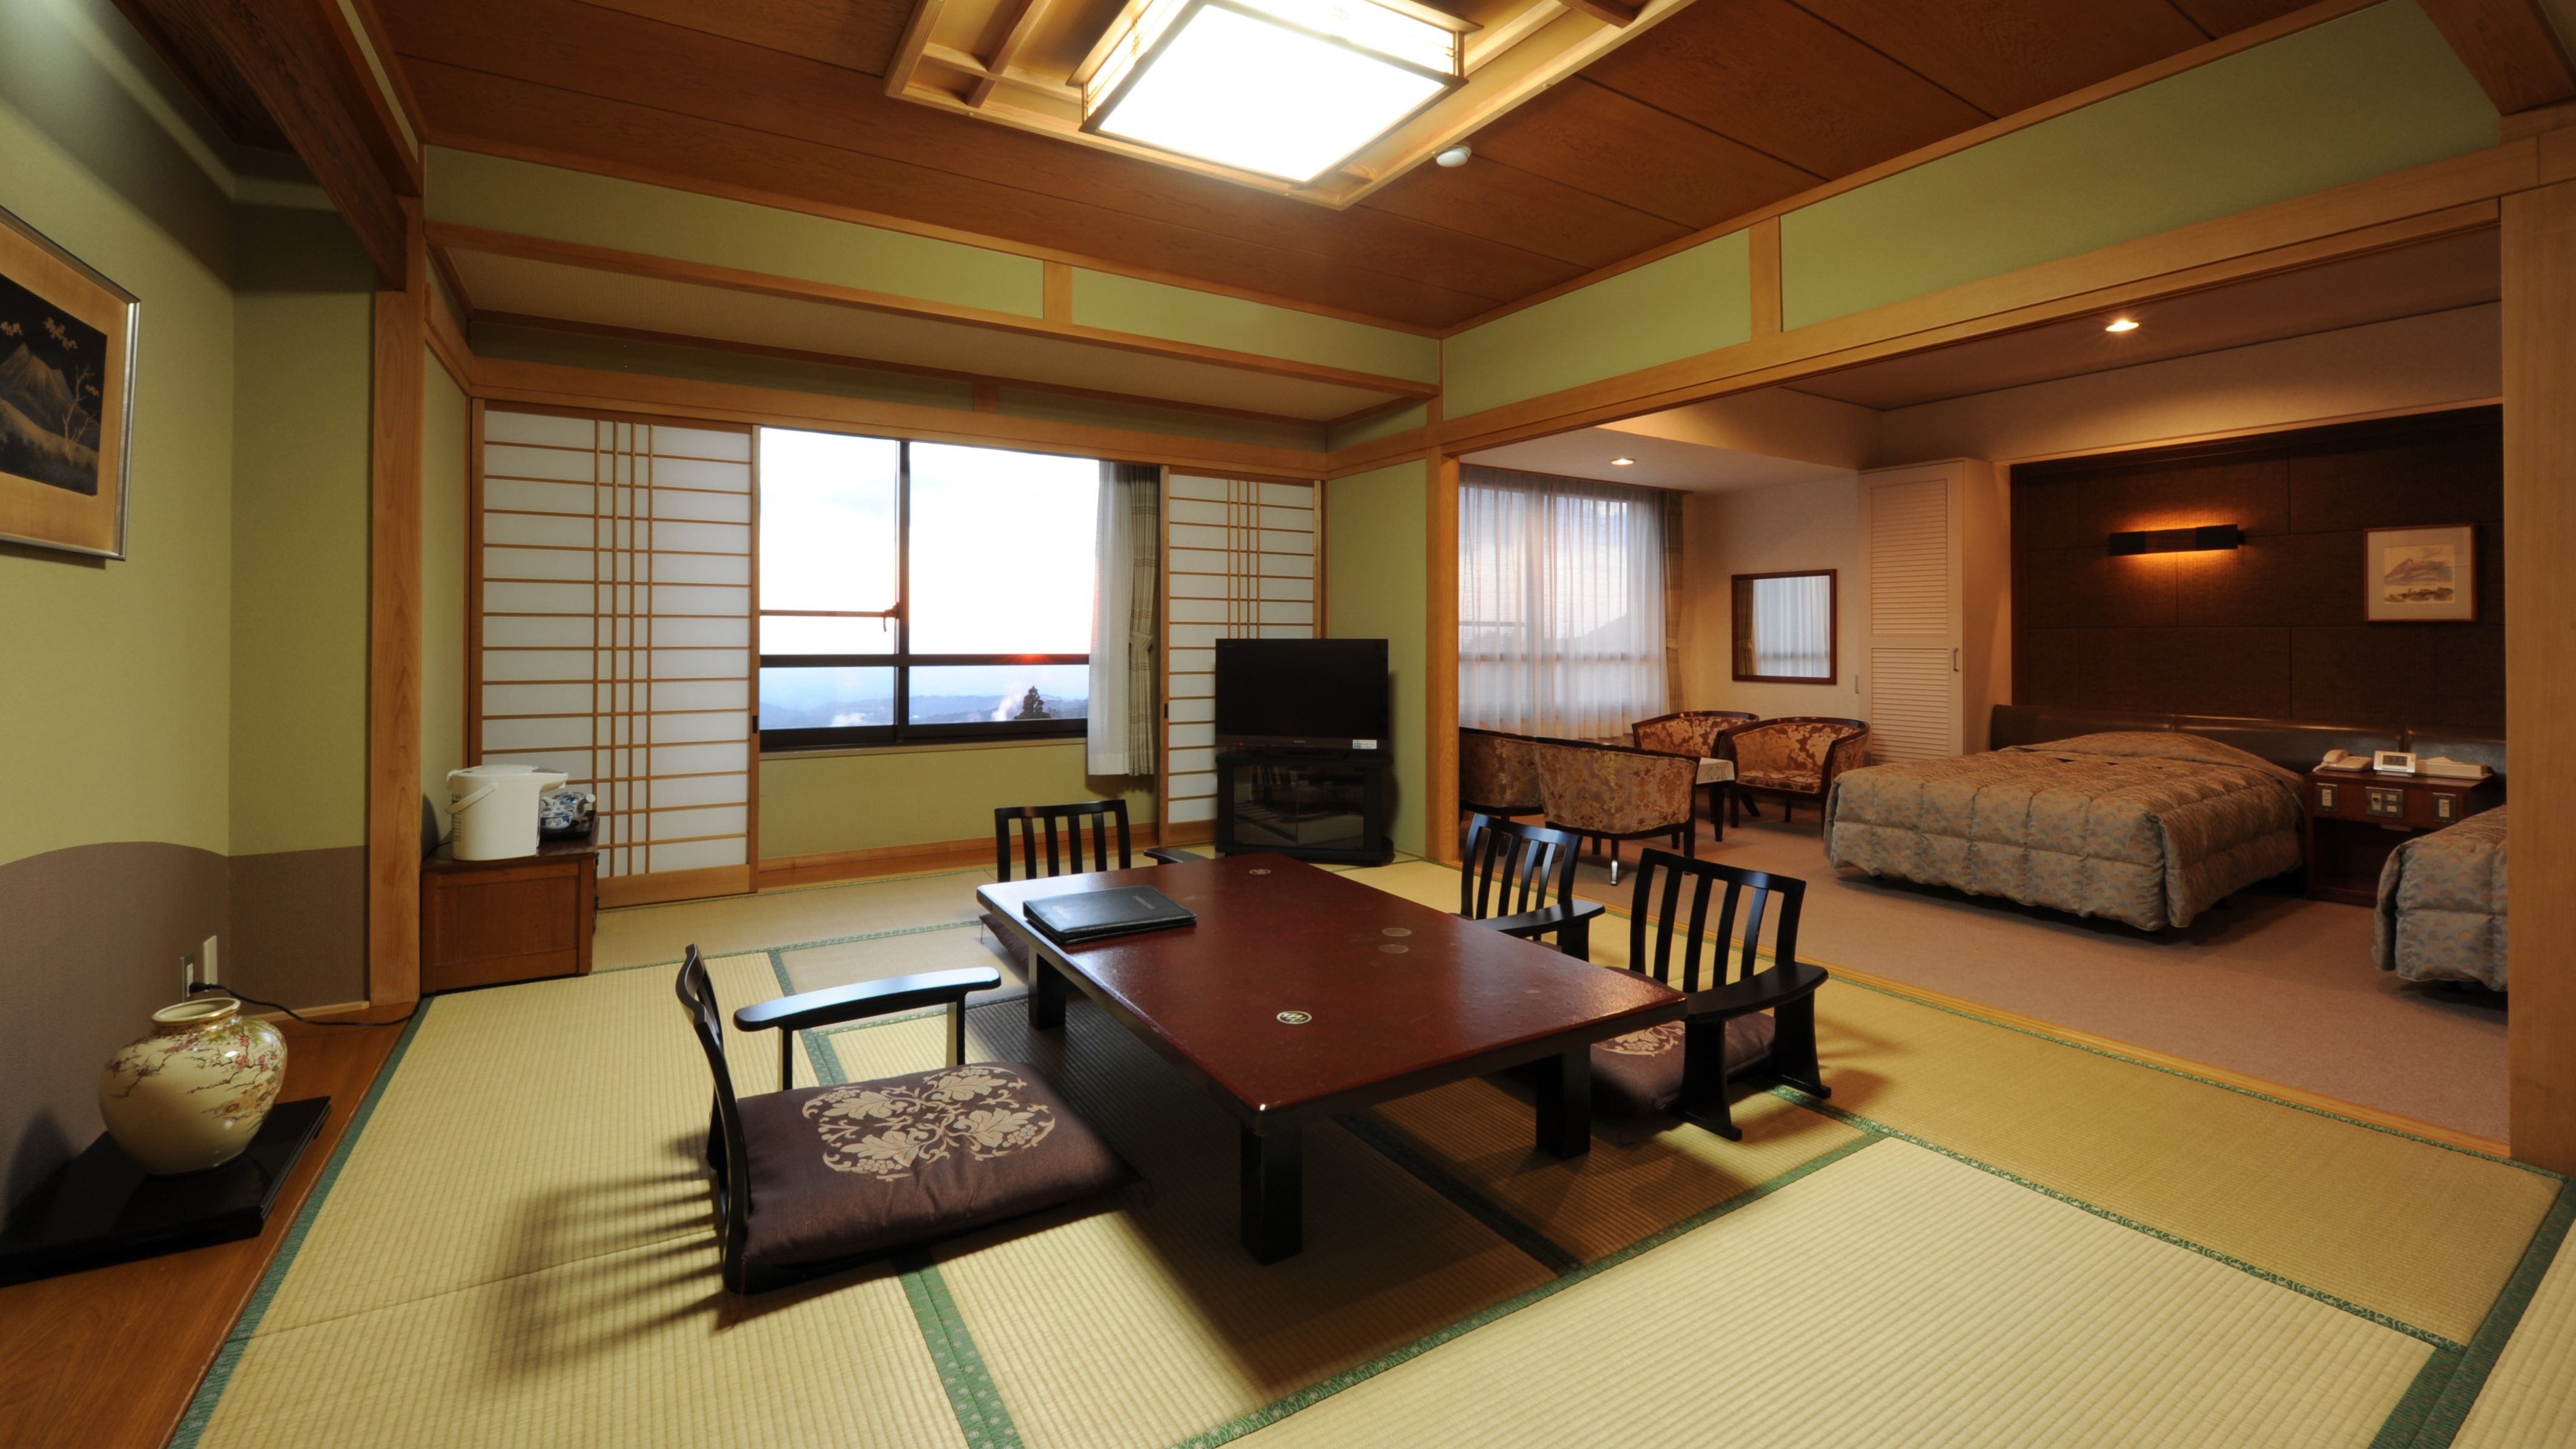 An example of a Japanese and Western room on the top floor of the East Building